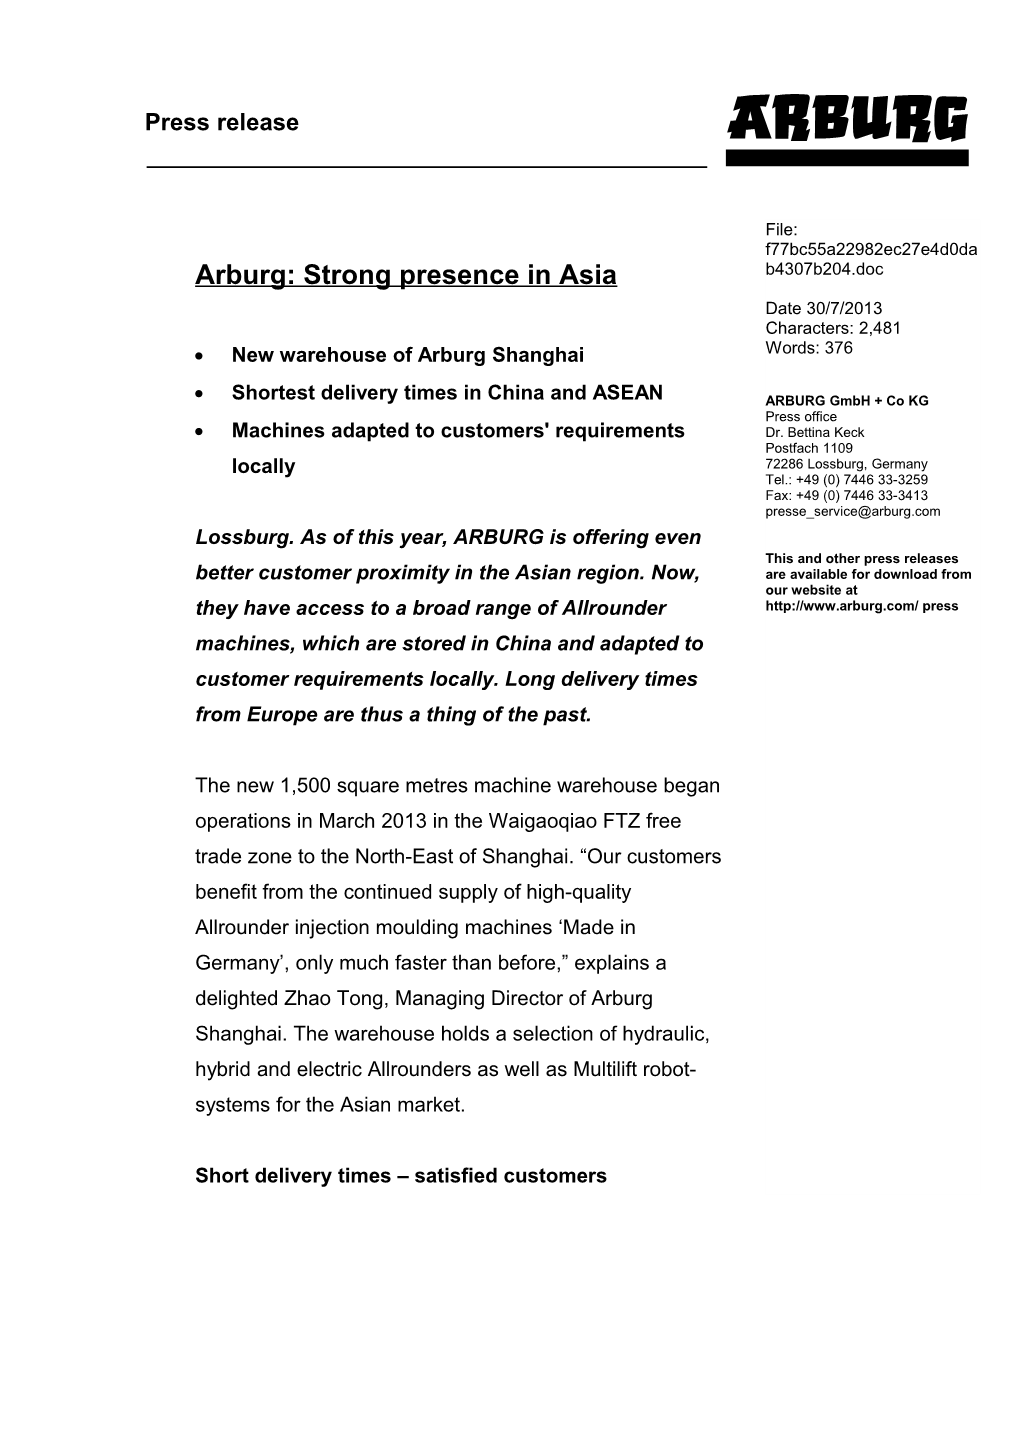 Arburg: Strong Presence in Asia